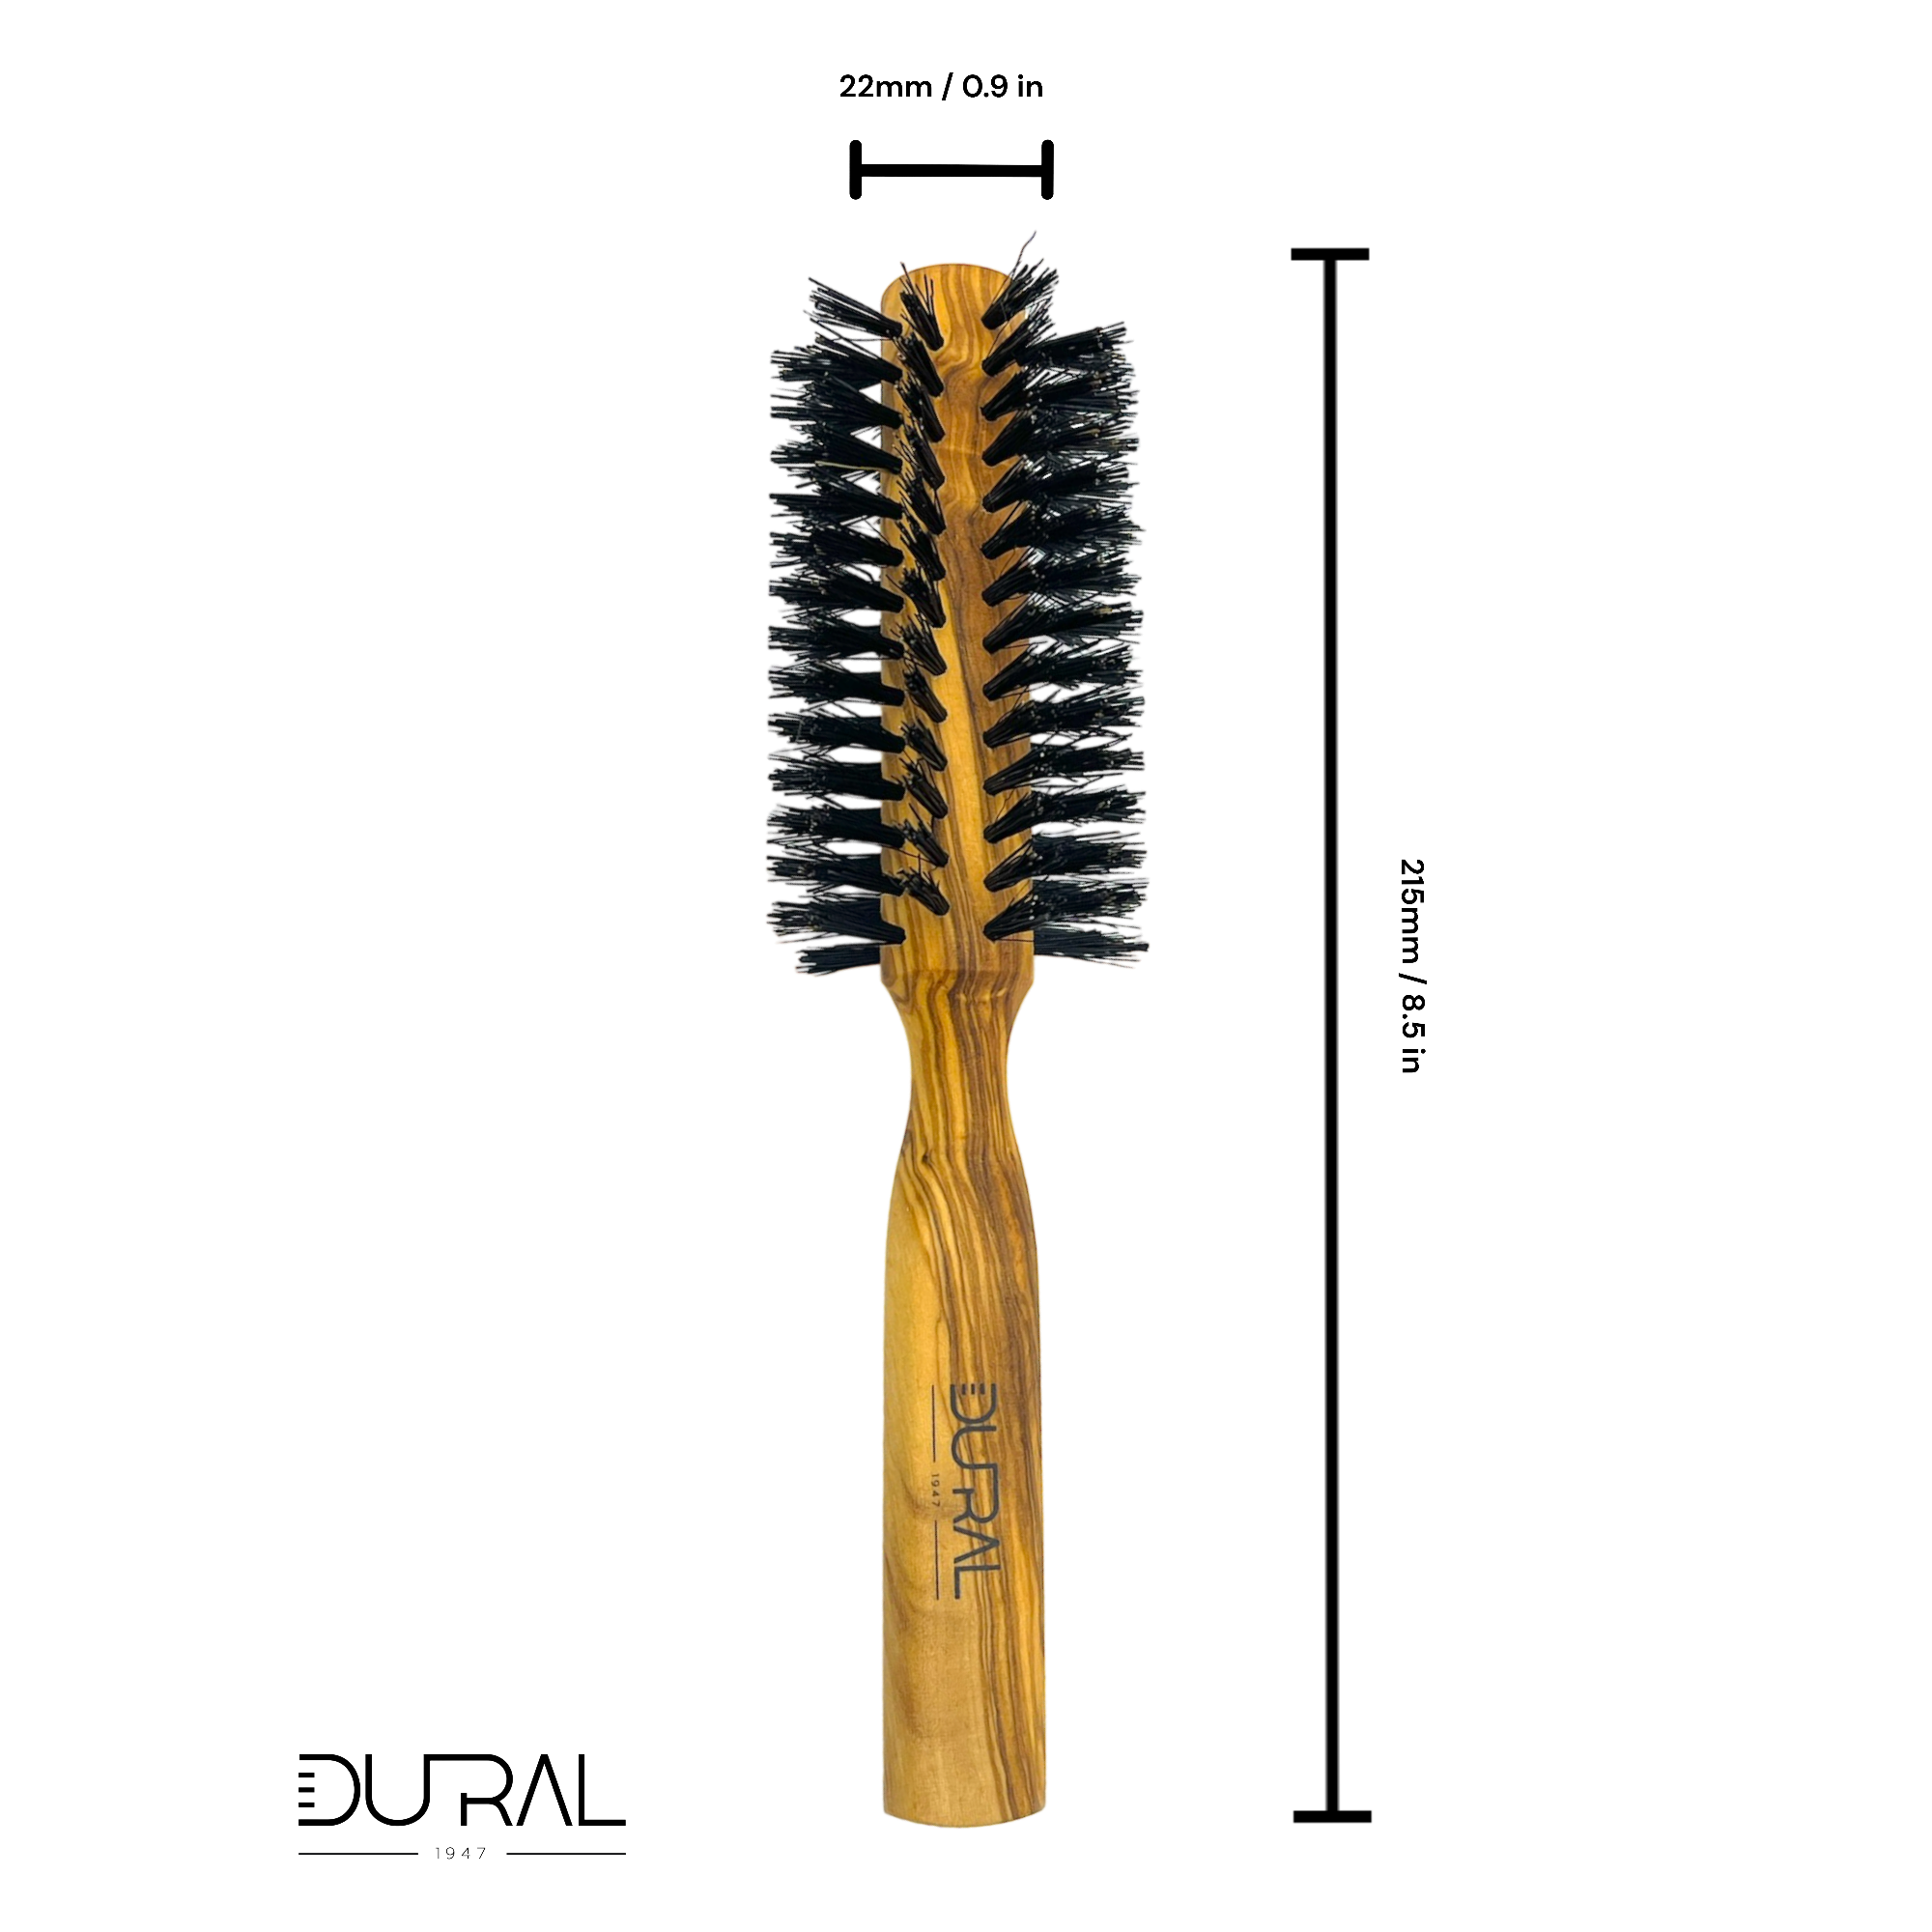 Dural Olive wood round hair brush with boar bristles - 10 rows